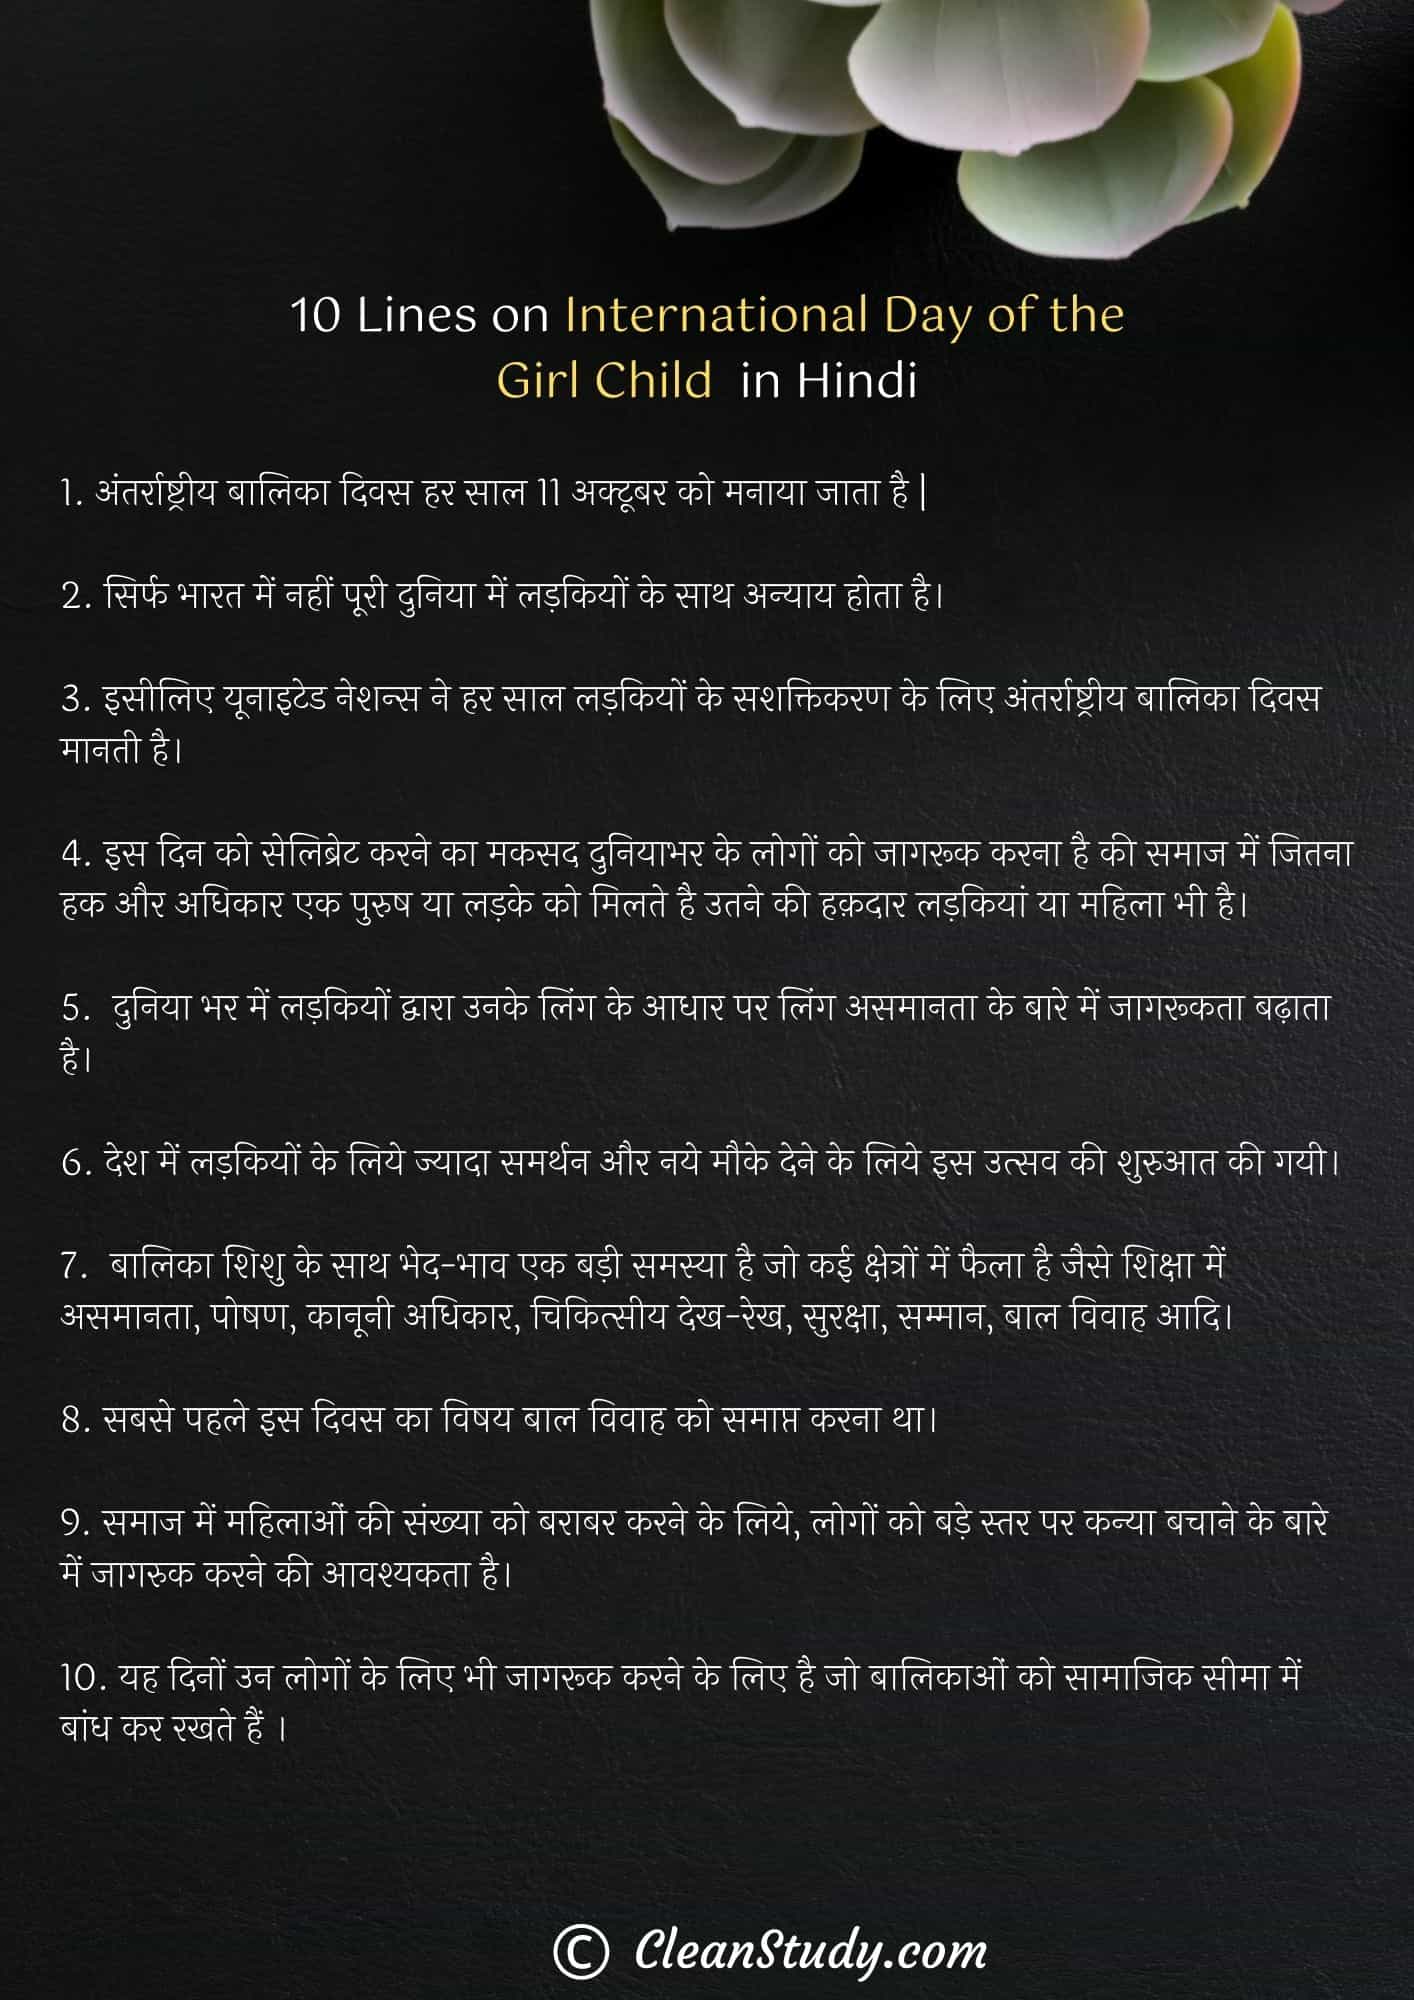 10 Lines on International Day of the Girl Child in Hindi